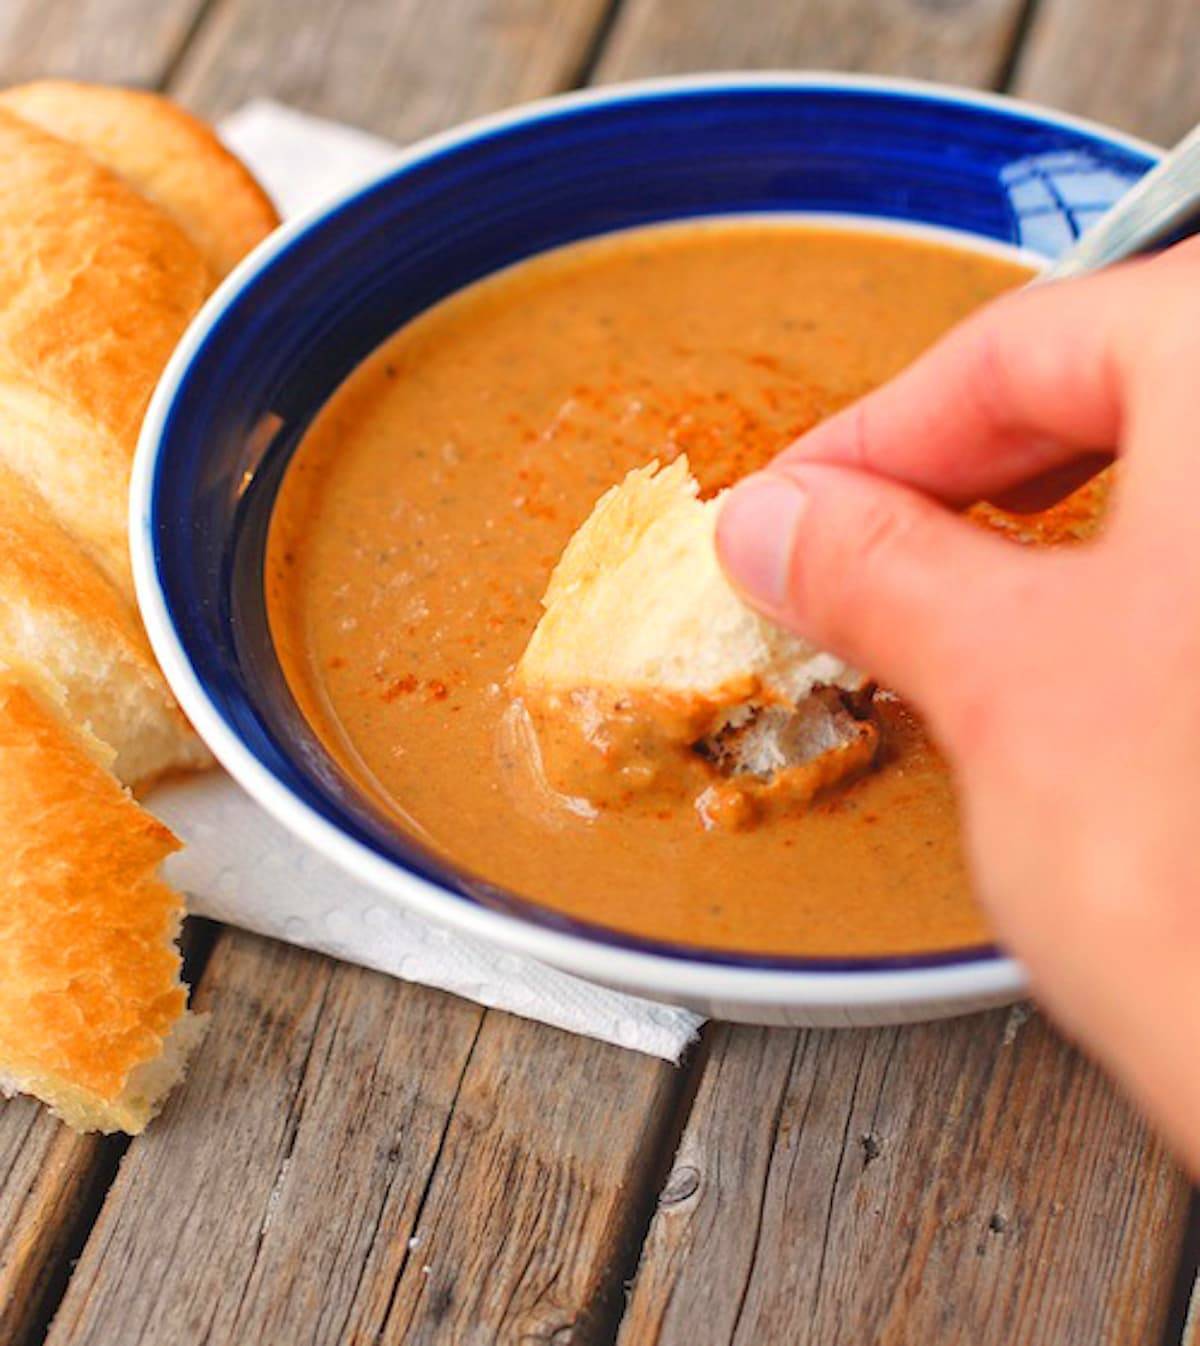 Pureed curry roasted red pepper and eggplant soup in a bowl with bread for dipping.